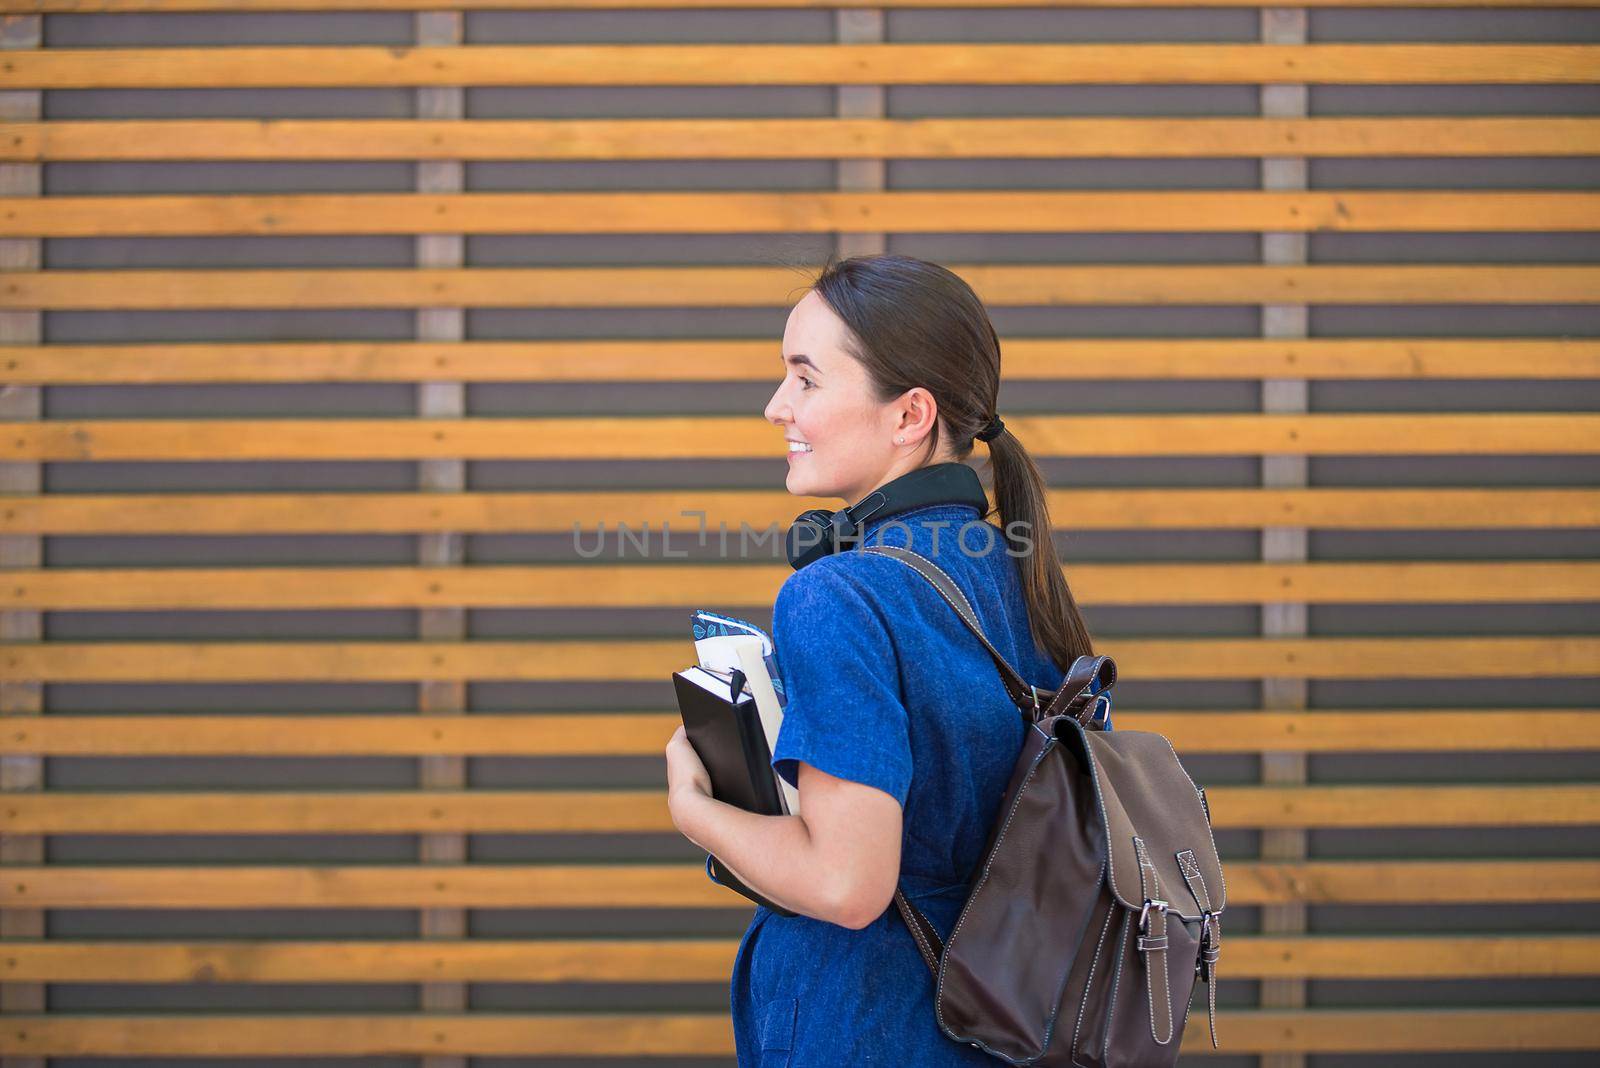 student girl is standing near wooden wall holding books